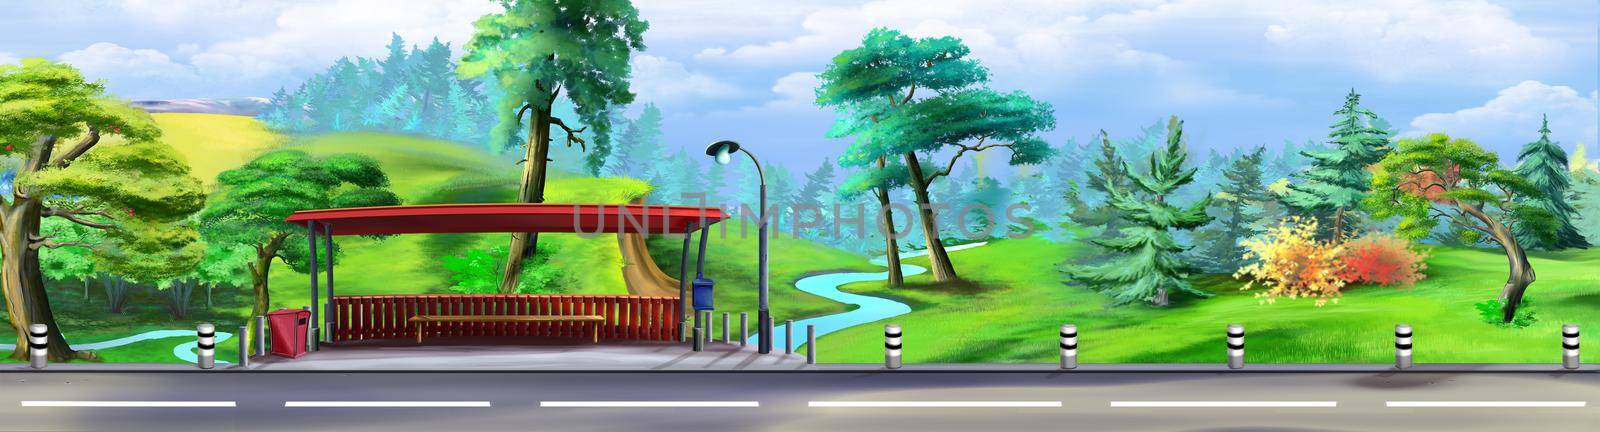 Bus stop on a Suburban highway along the park on a sunny day. Digital Painting Background, Illustration.